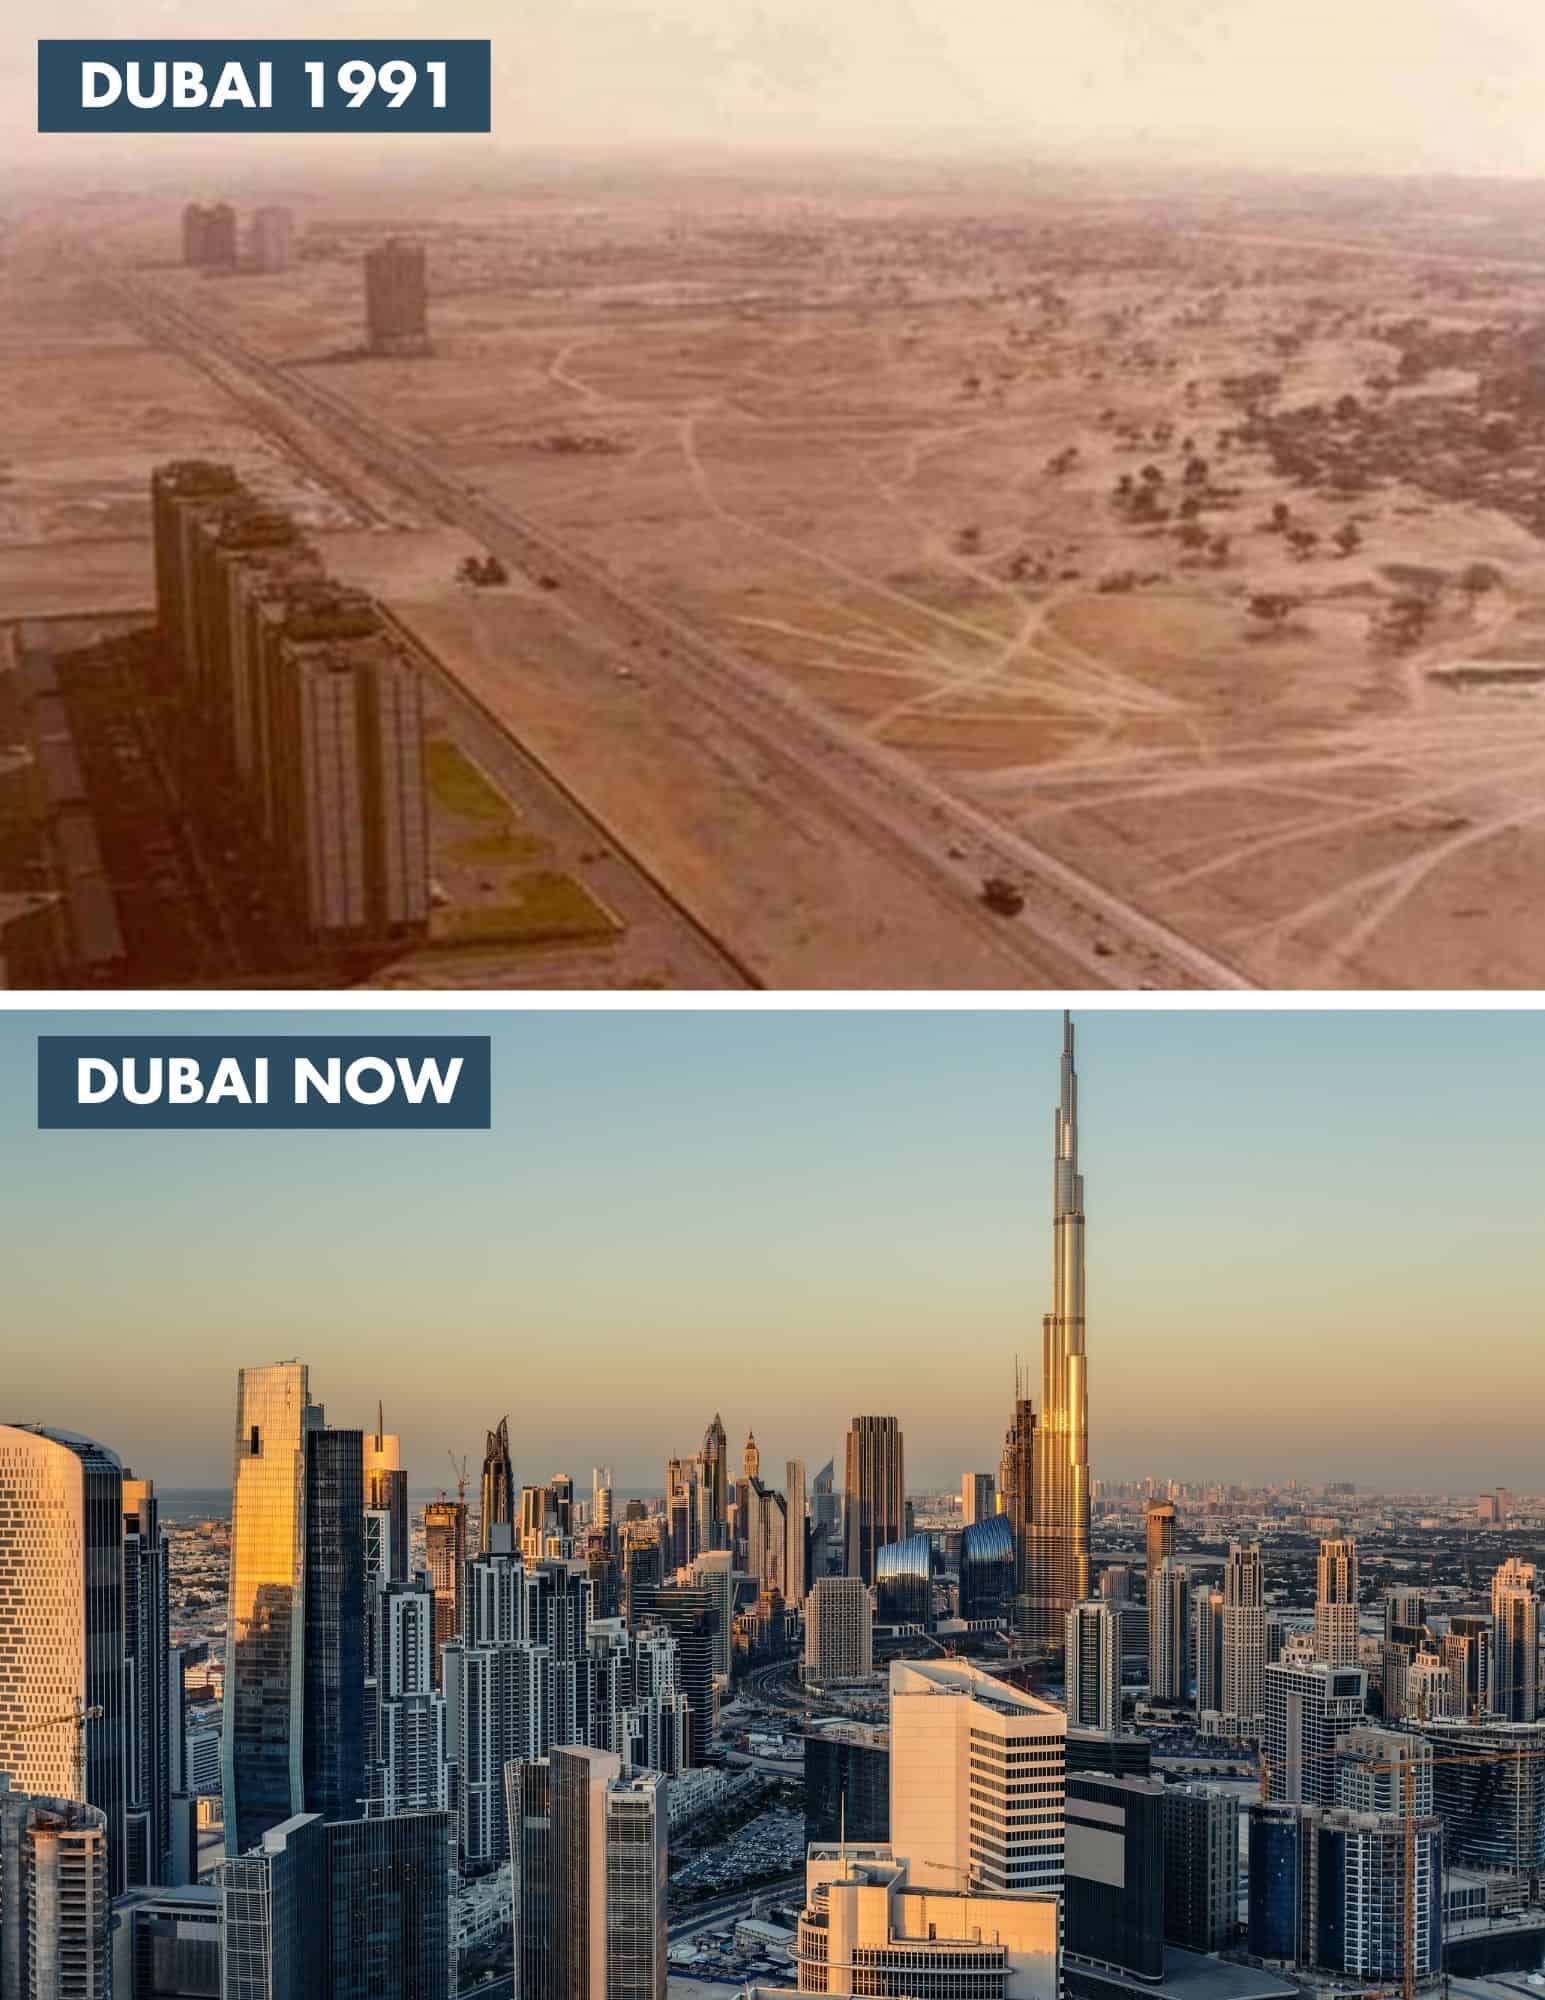 DUBAI THEN AND NOW